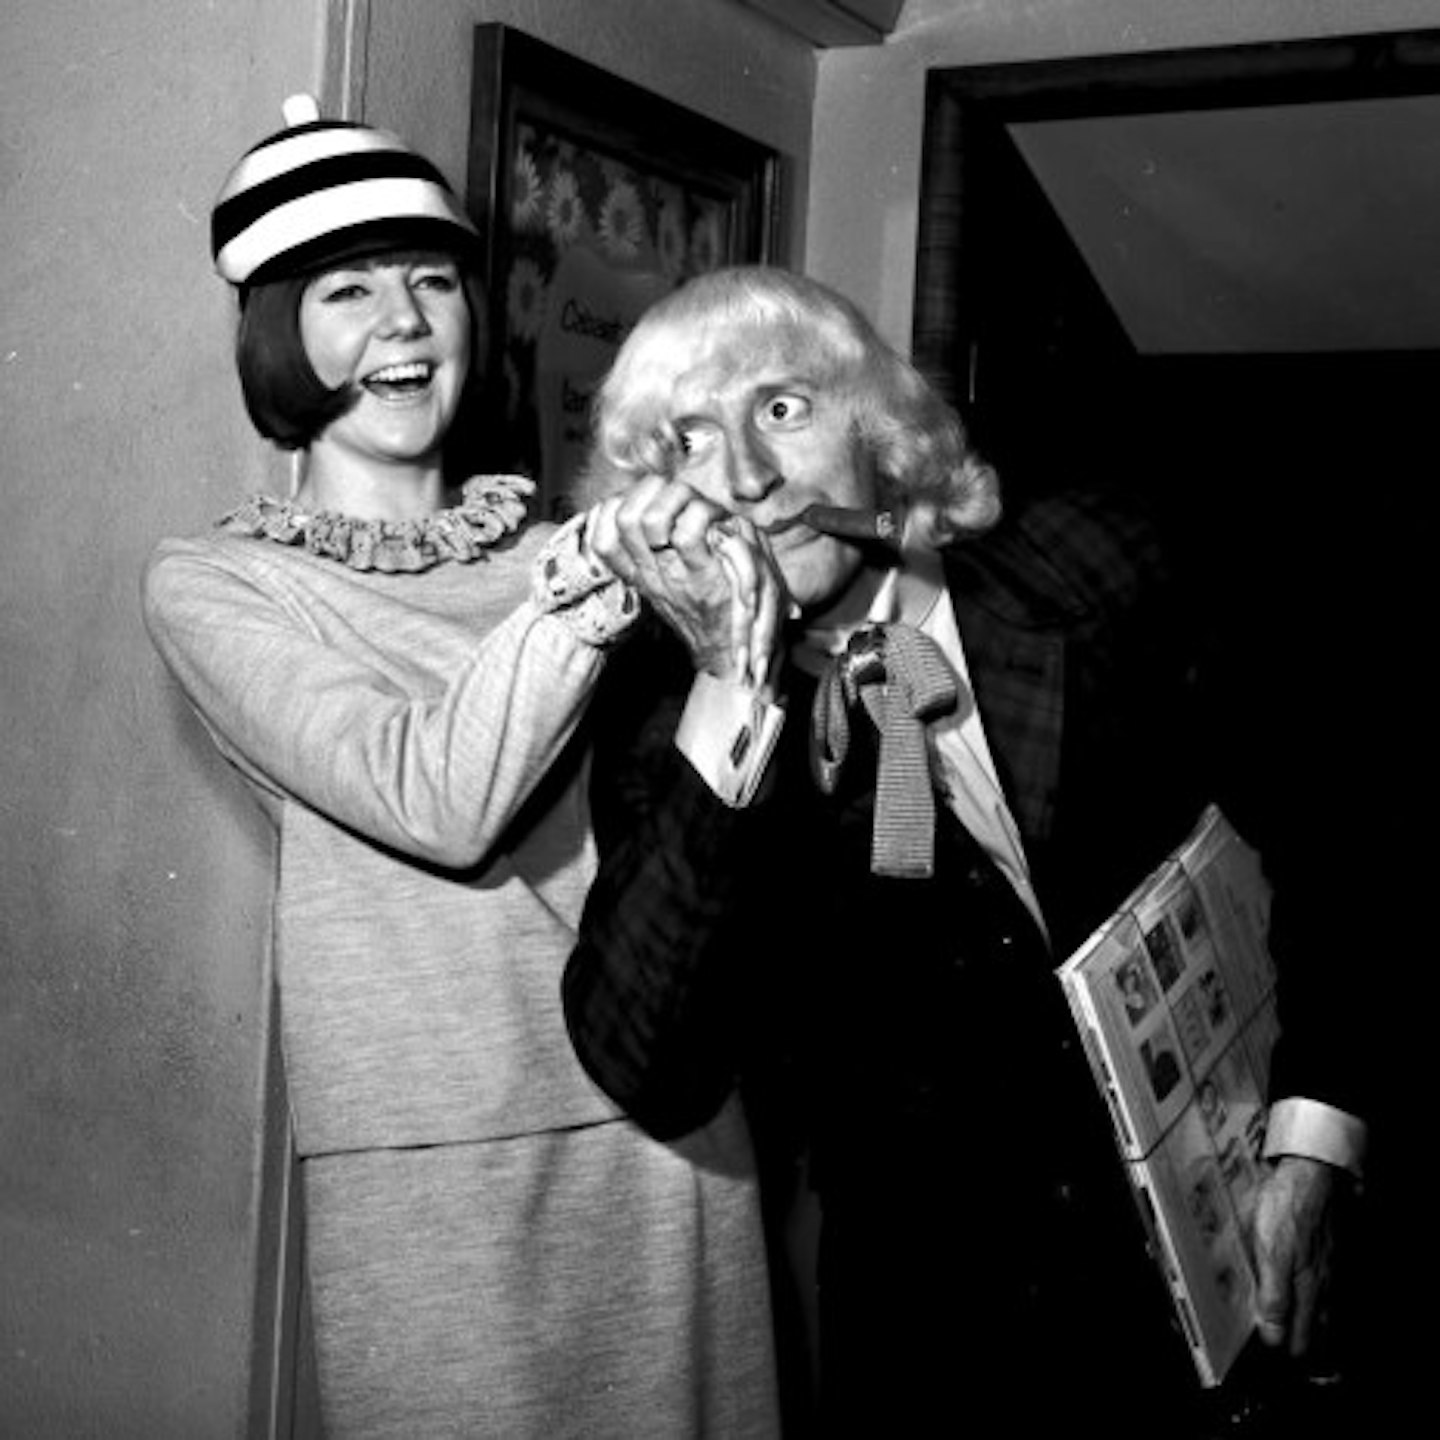 Jimmy Savile and Cilla Black in 1964